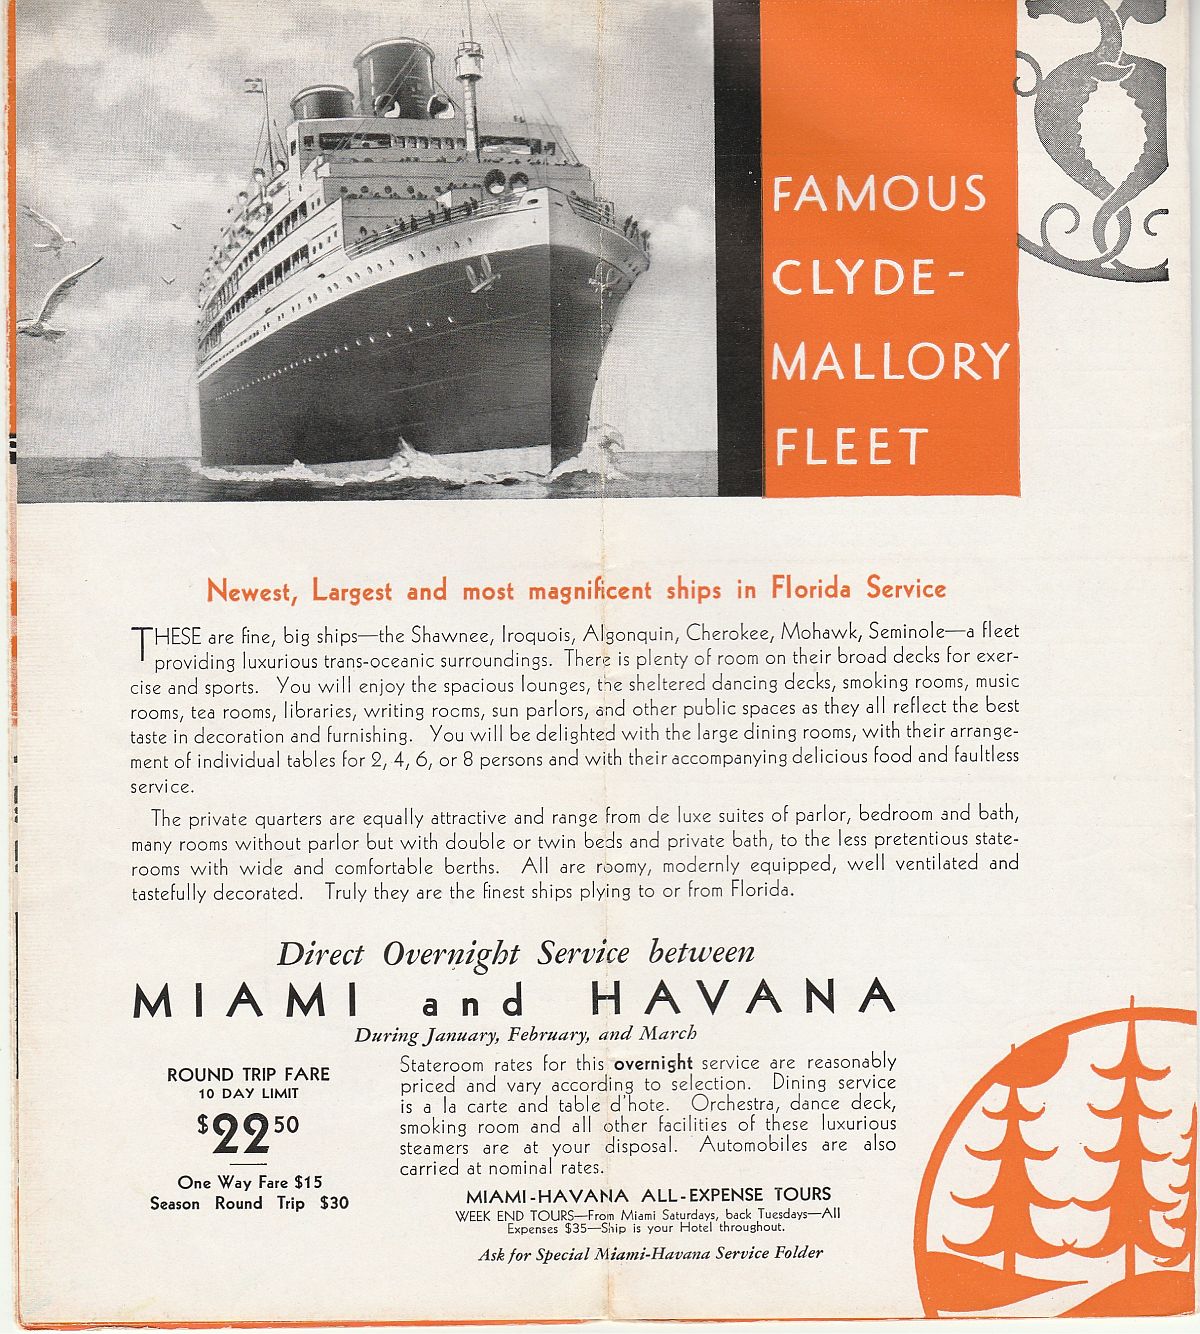 Clyde-Mallory Lines Famous Florida fleet: Newest, largest and most magnificent ships in Florida service